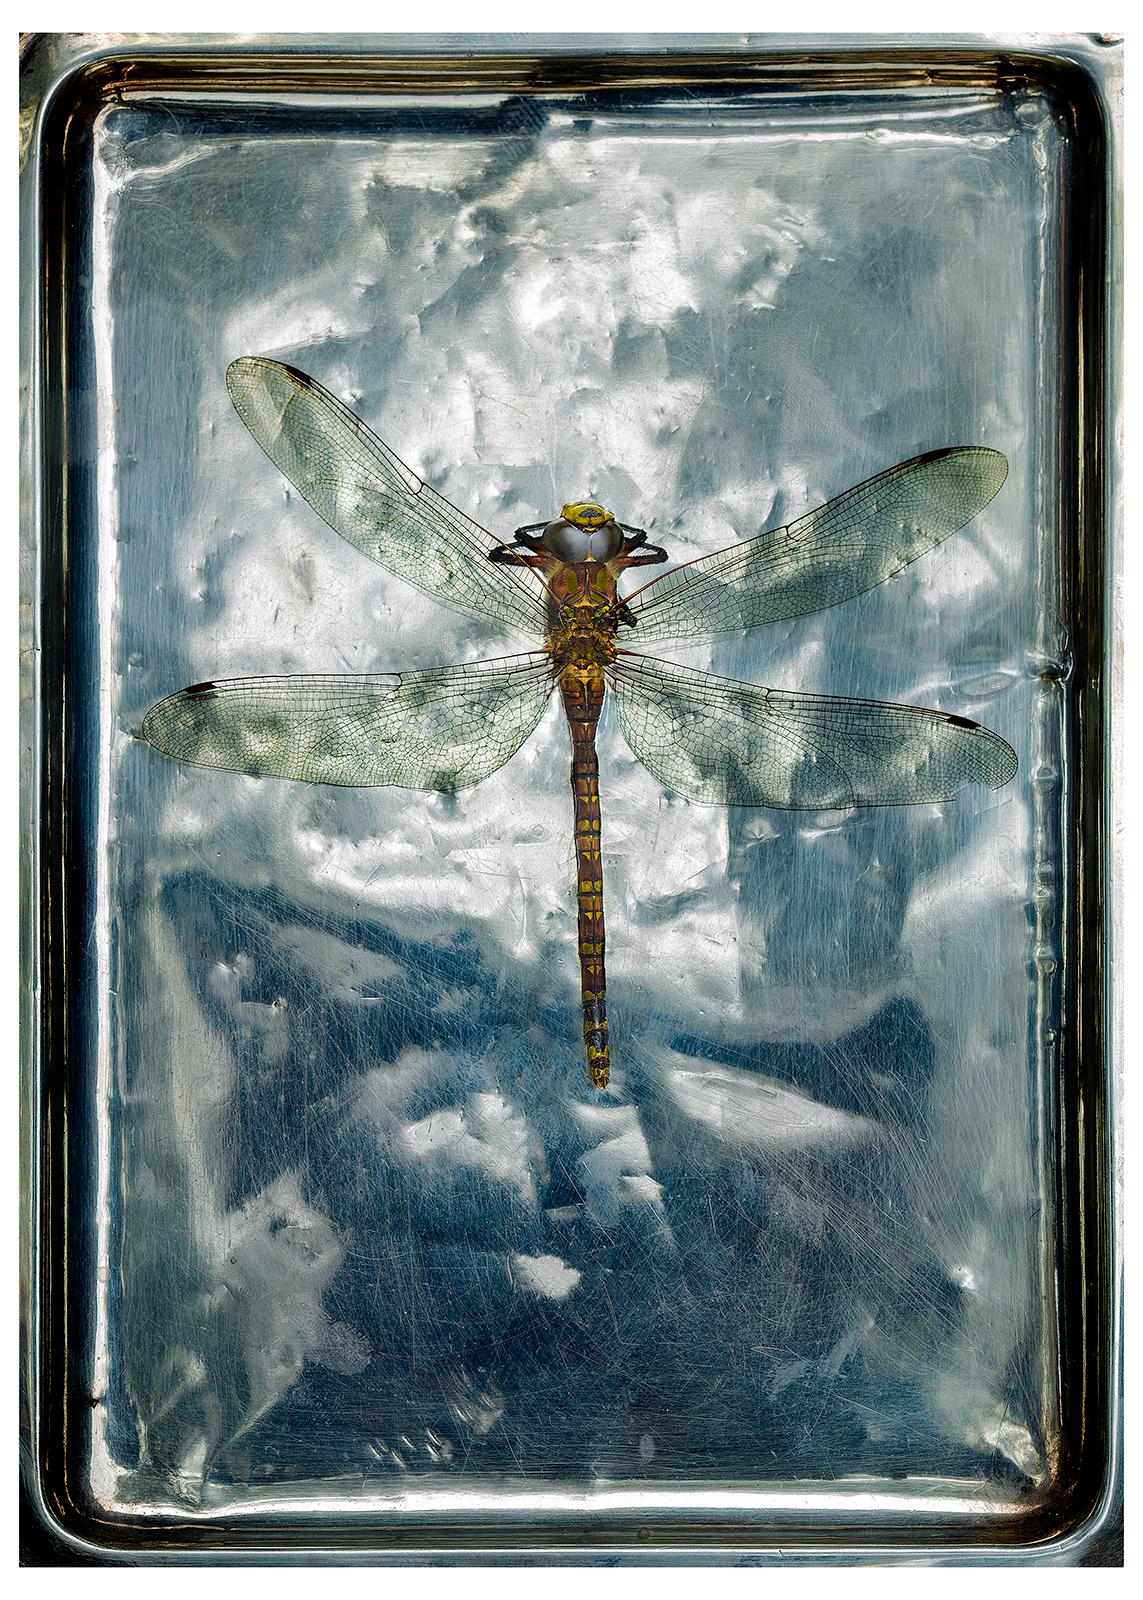 Dragonfly - Signed limited edition nature print, still life colour photo, insect